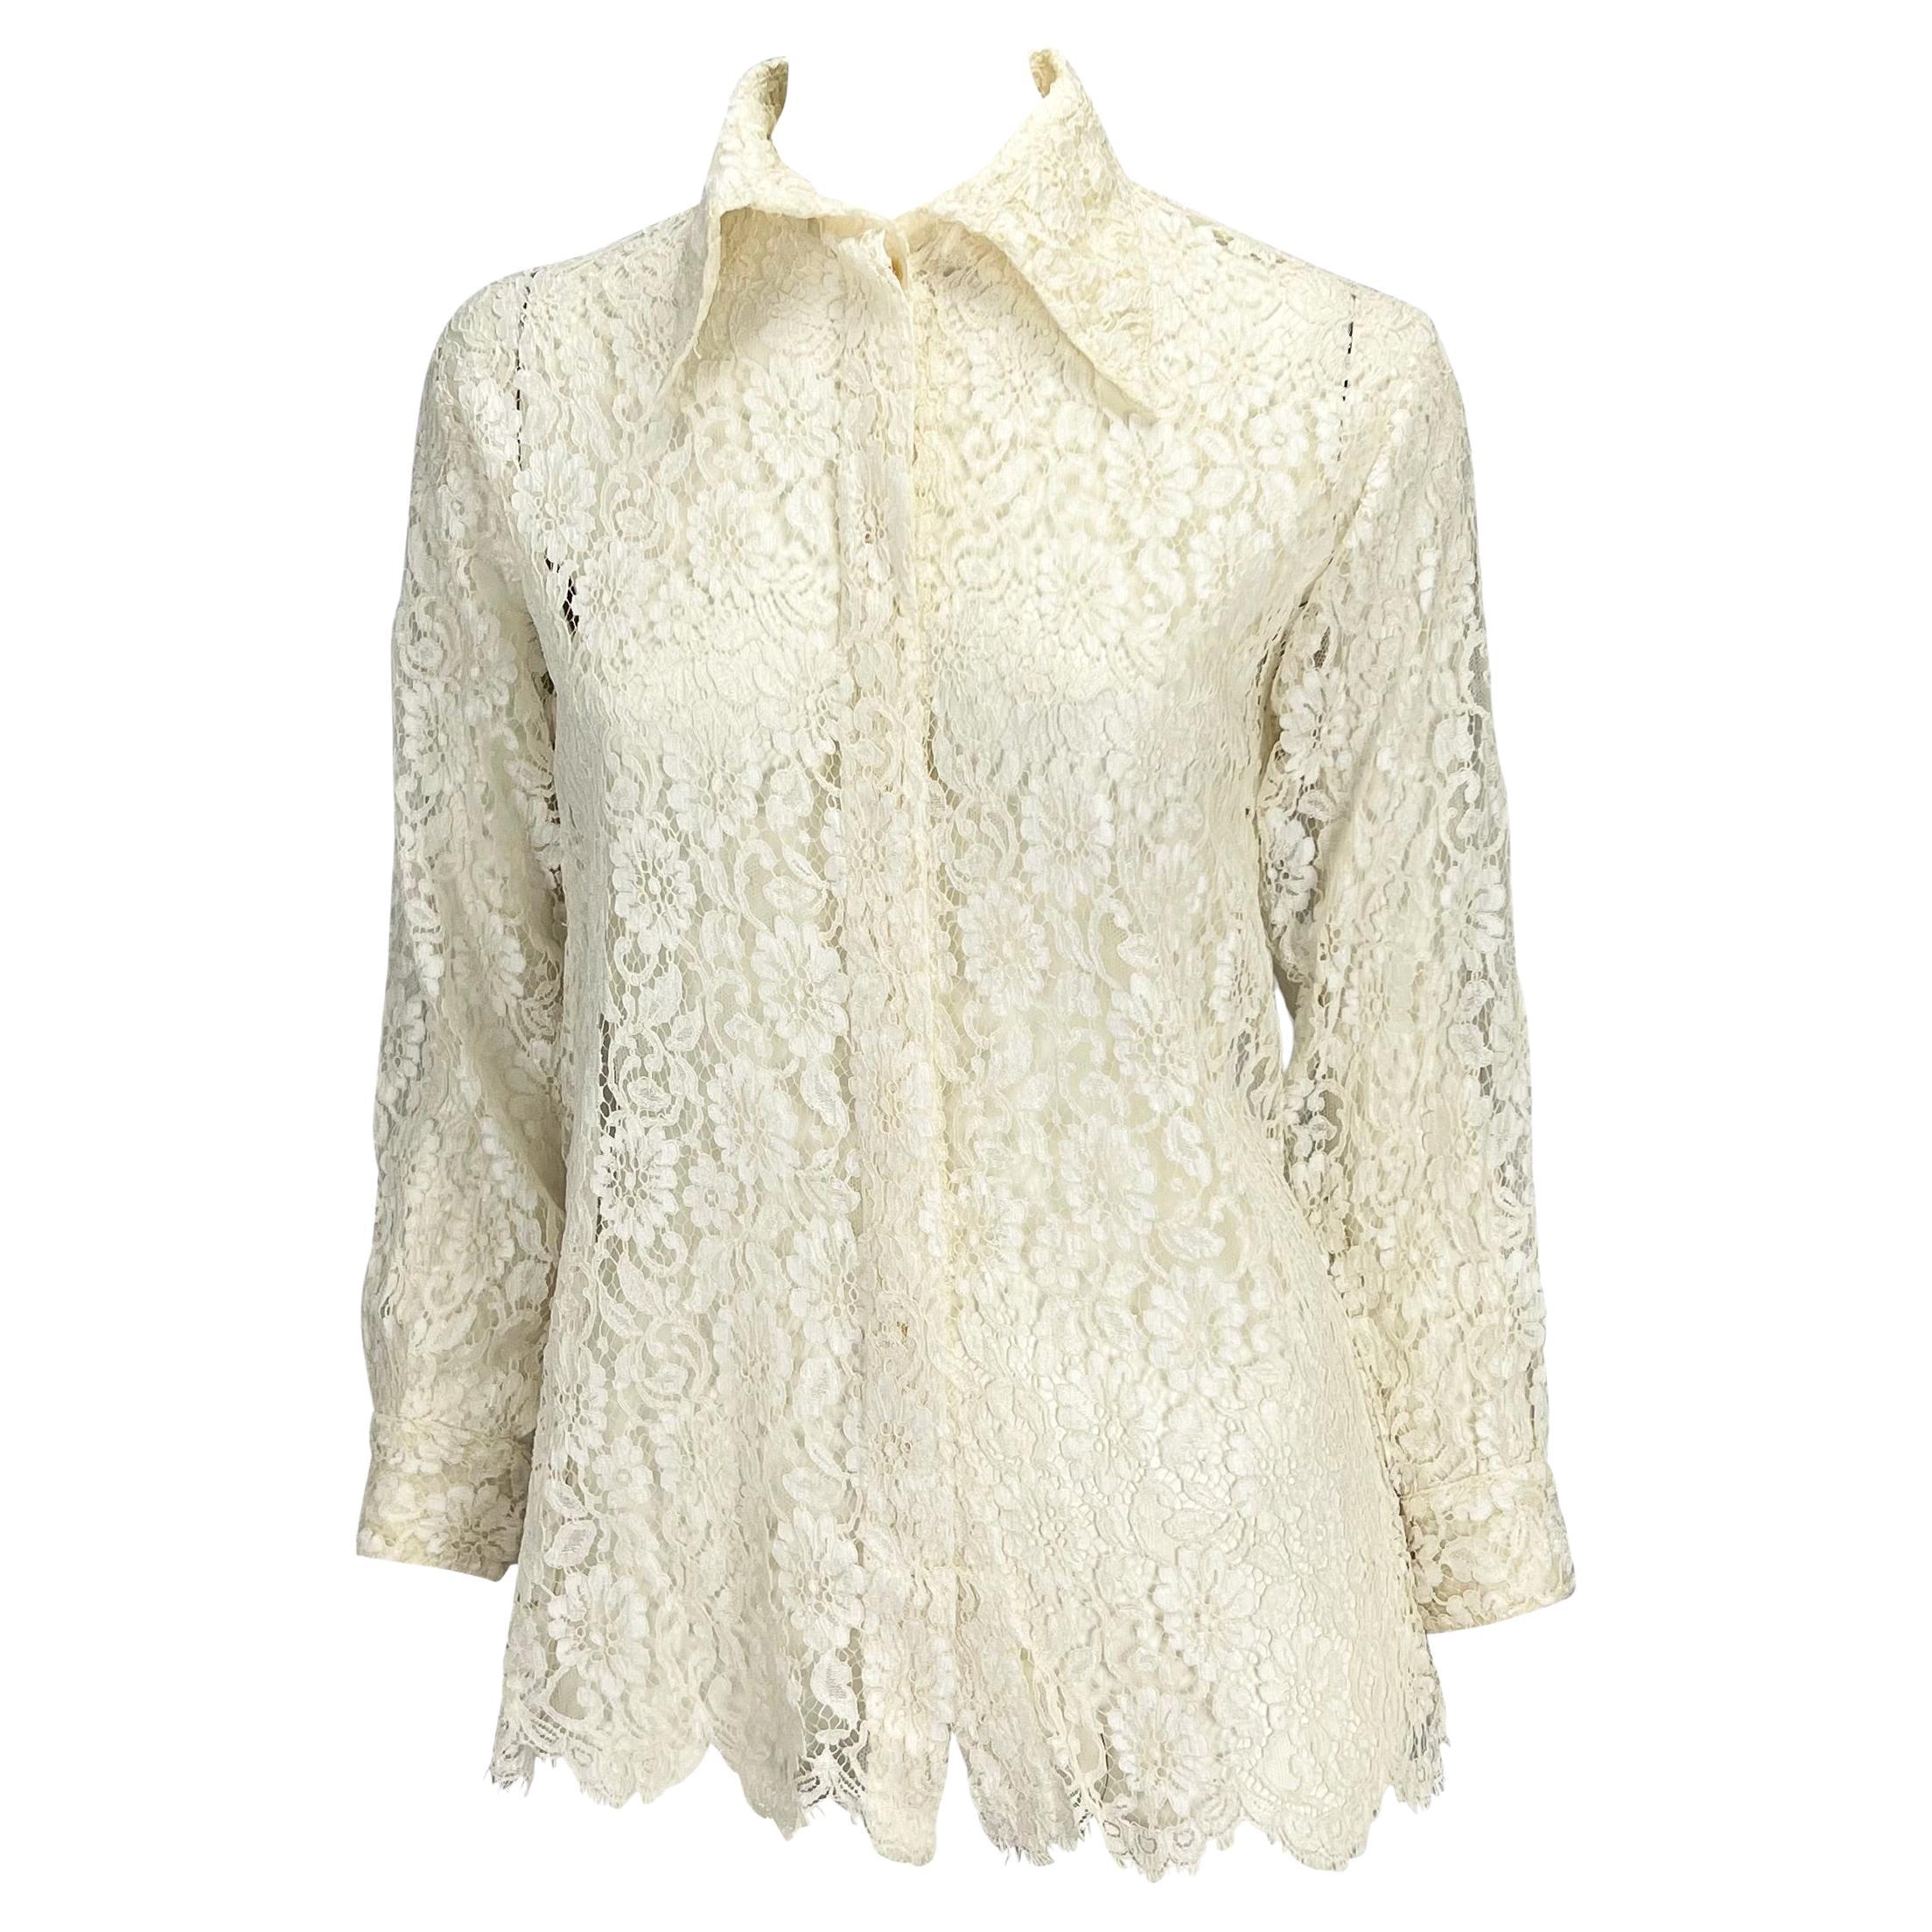 S/S 1994 Gianni Versace Couture Sheer White Lace Button Up Medusa Top For Sale